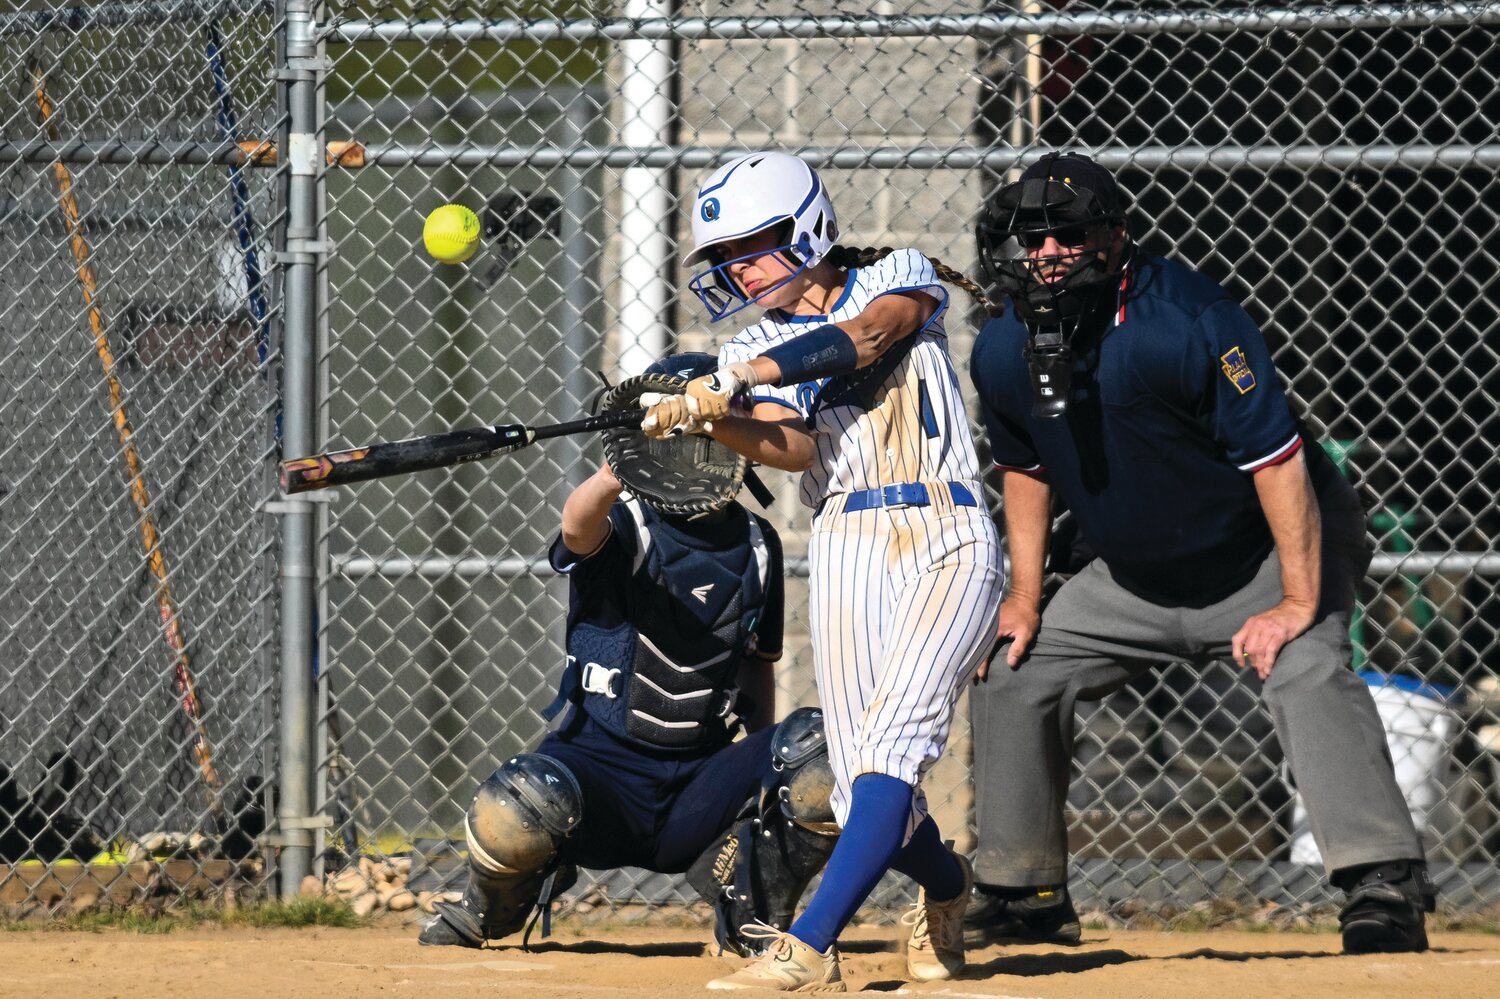 Quakertown’s Kira Jefferson bats in the fourth inning of Friday’s game against New Hope-Solebury.